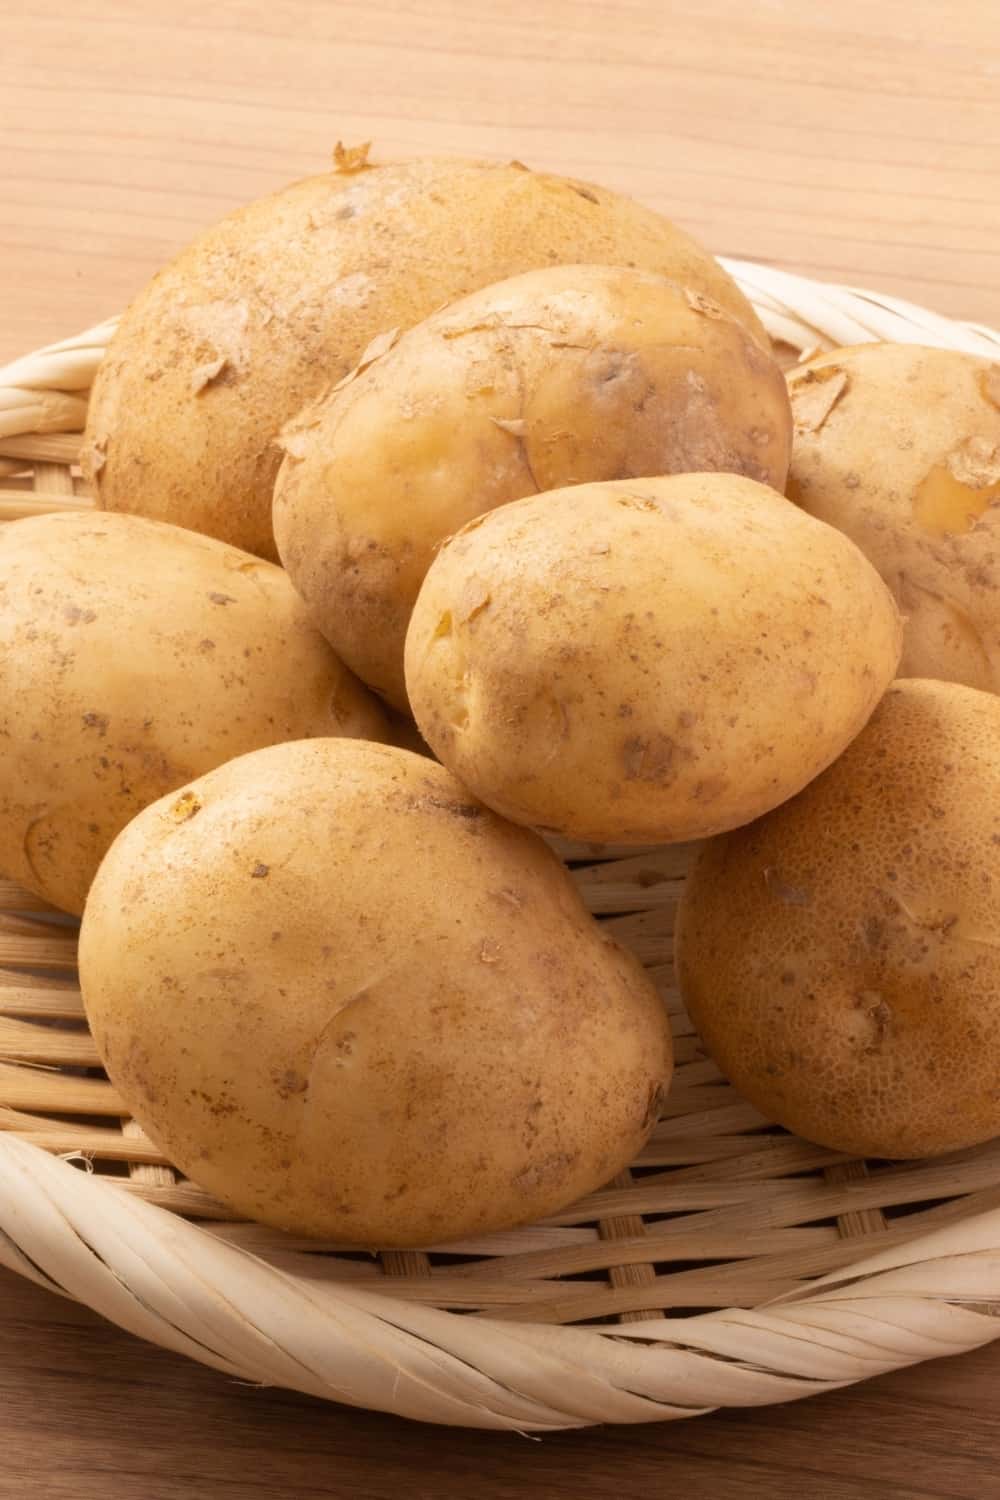 The variety name of new potatoes from Kagoshima prefecture in Japan